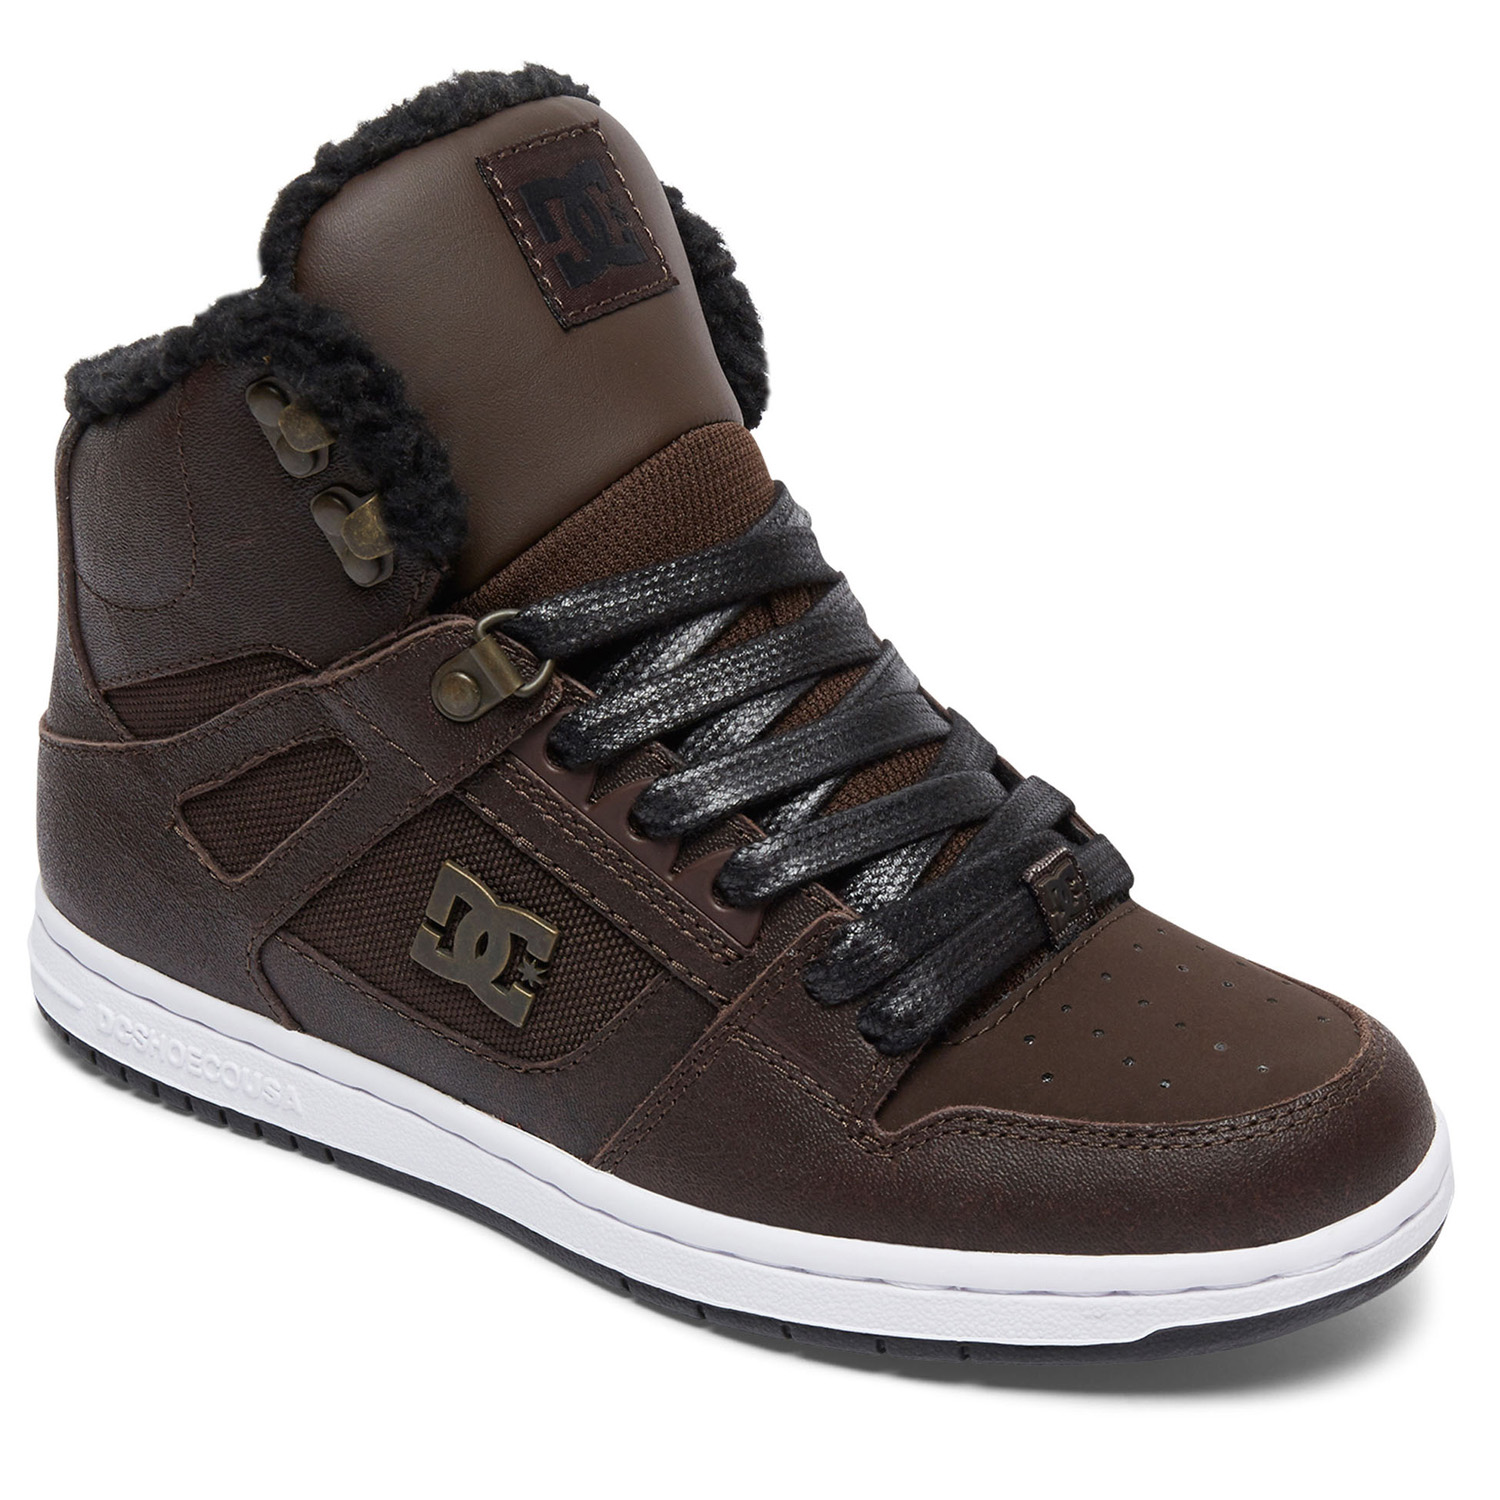 DC Femme Chaussures d'Hiver Rebound High WNT Brown/Chocolate